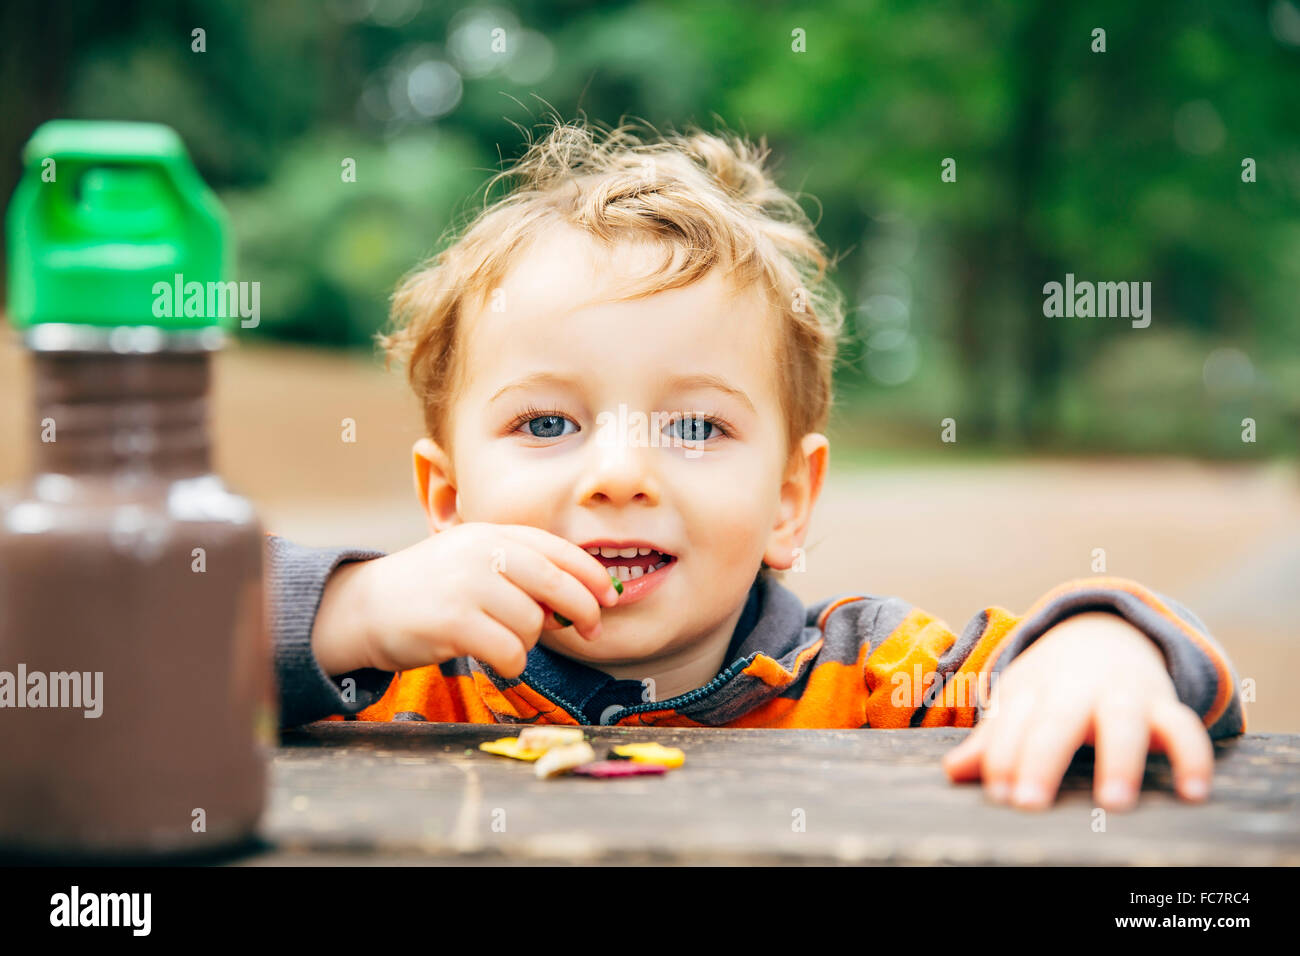 Caucasian boy eating snack at picnic table Stock Photo